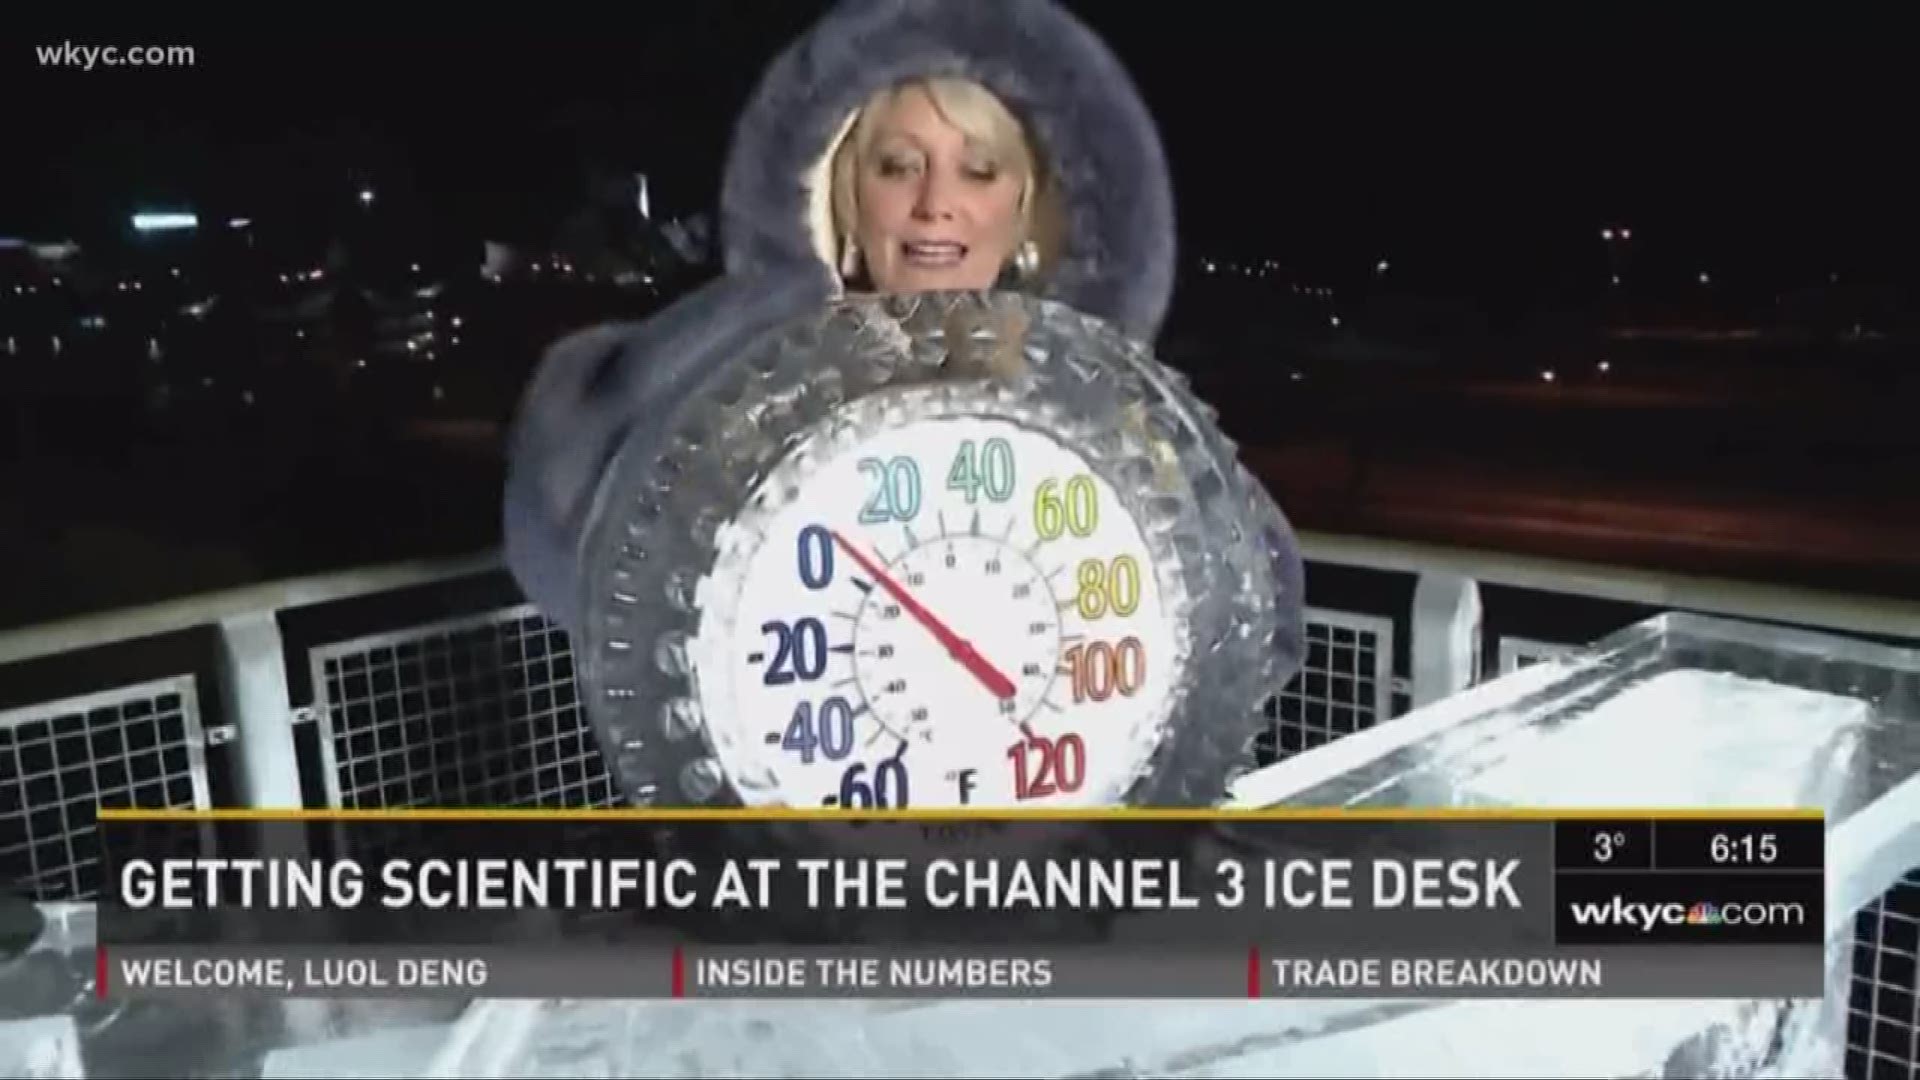 Feb. 20, 2019: It was a moment that went viral: Robin Swoboda's epic ice desk rap.